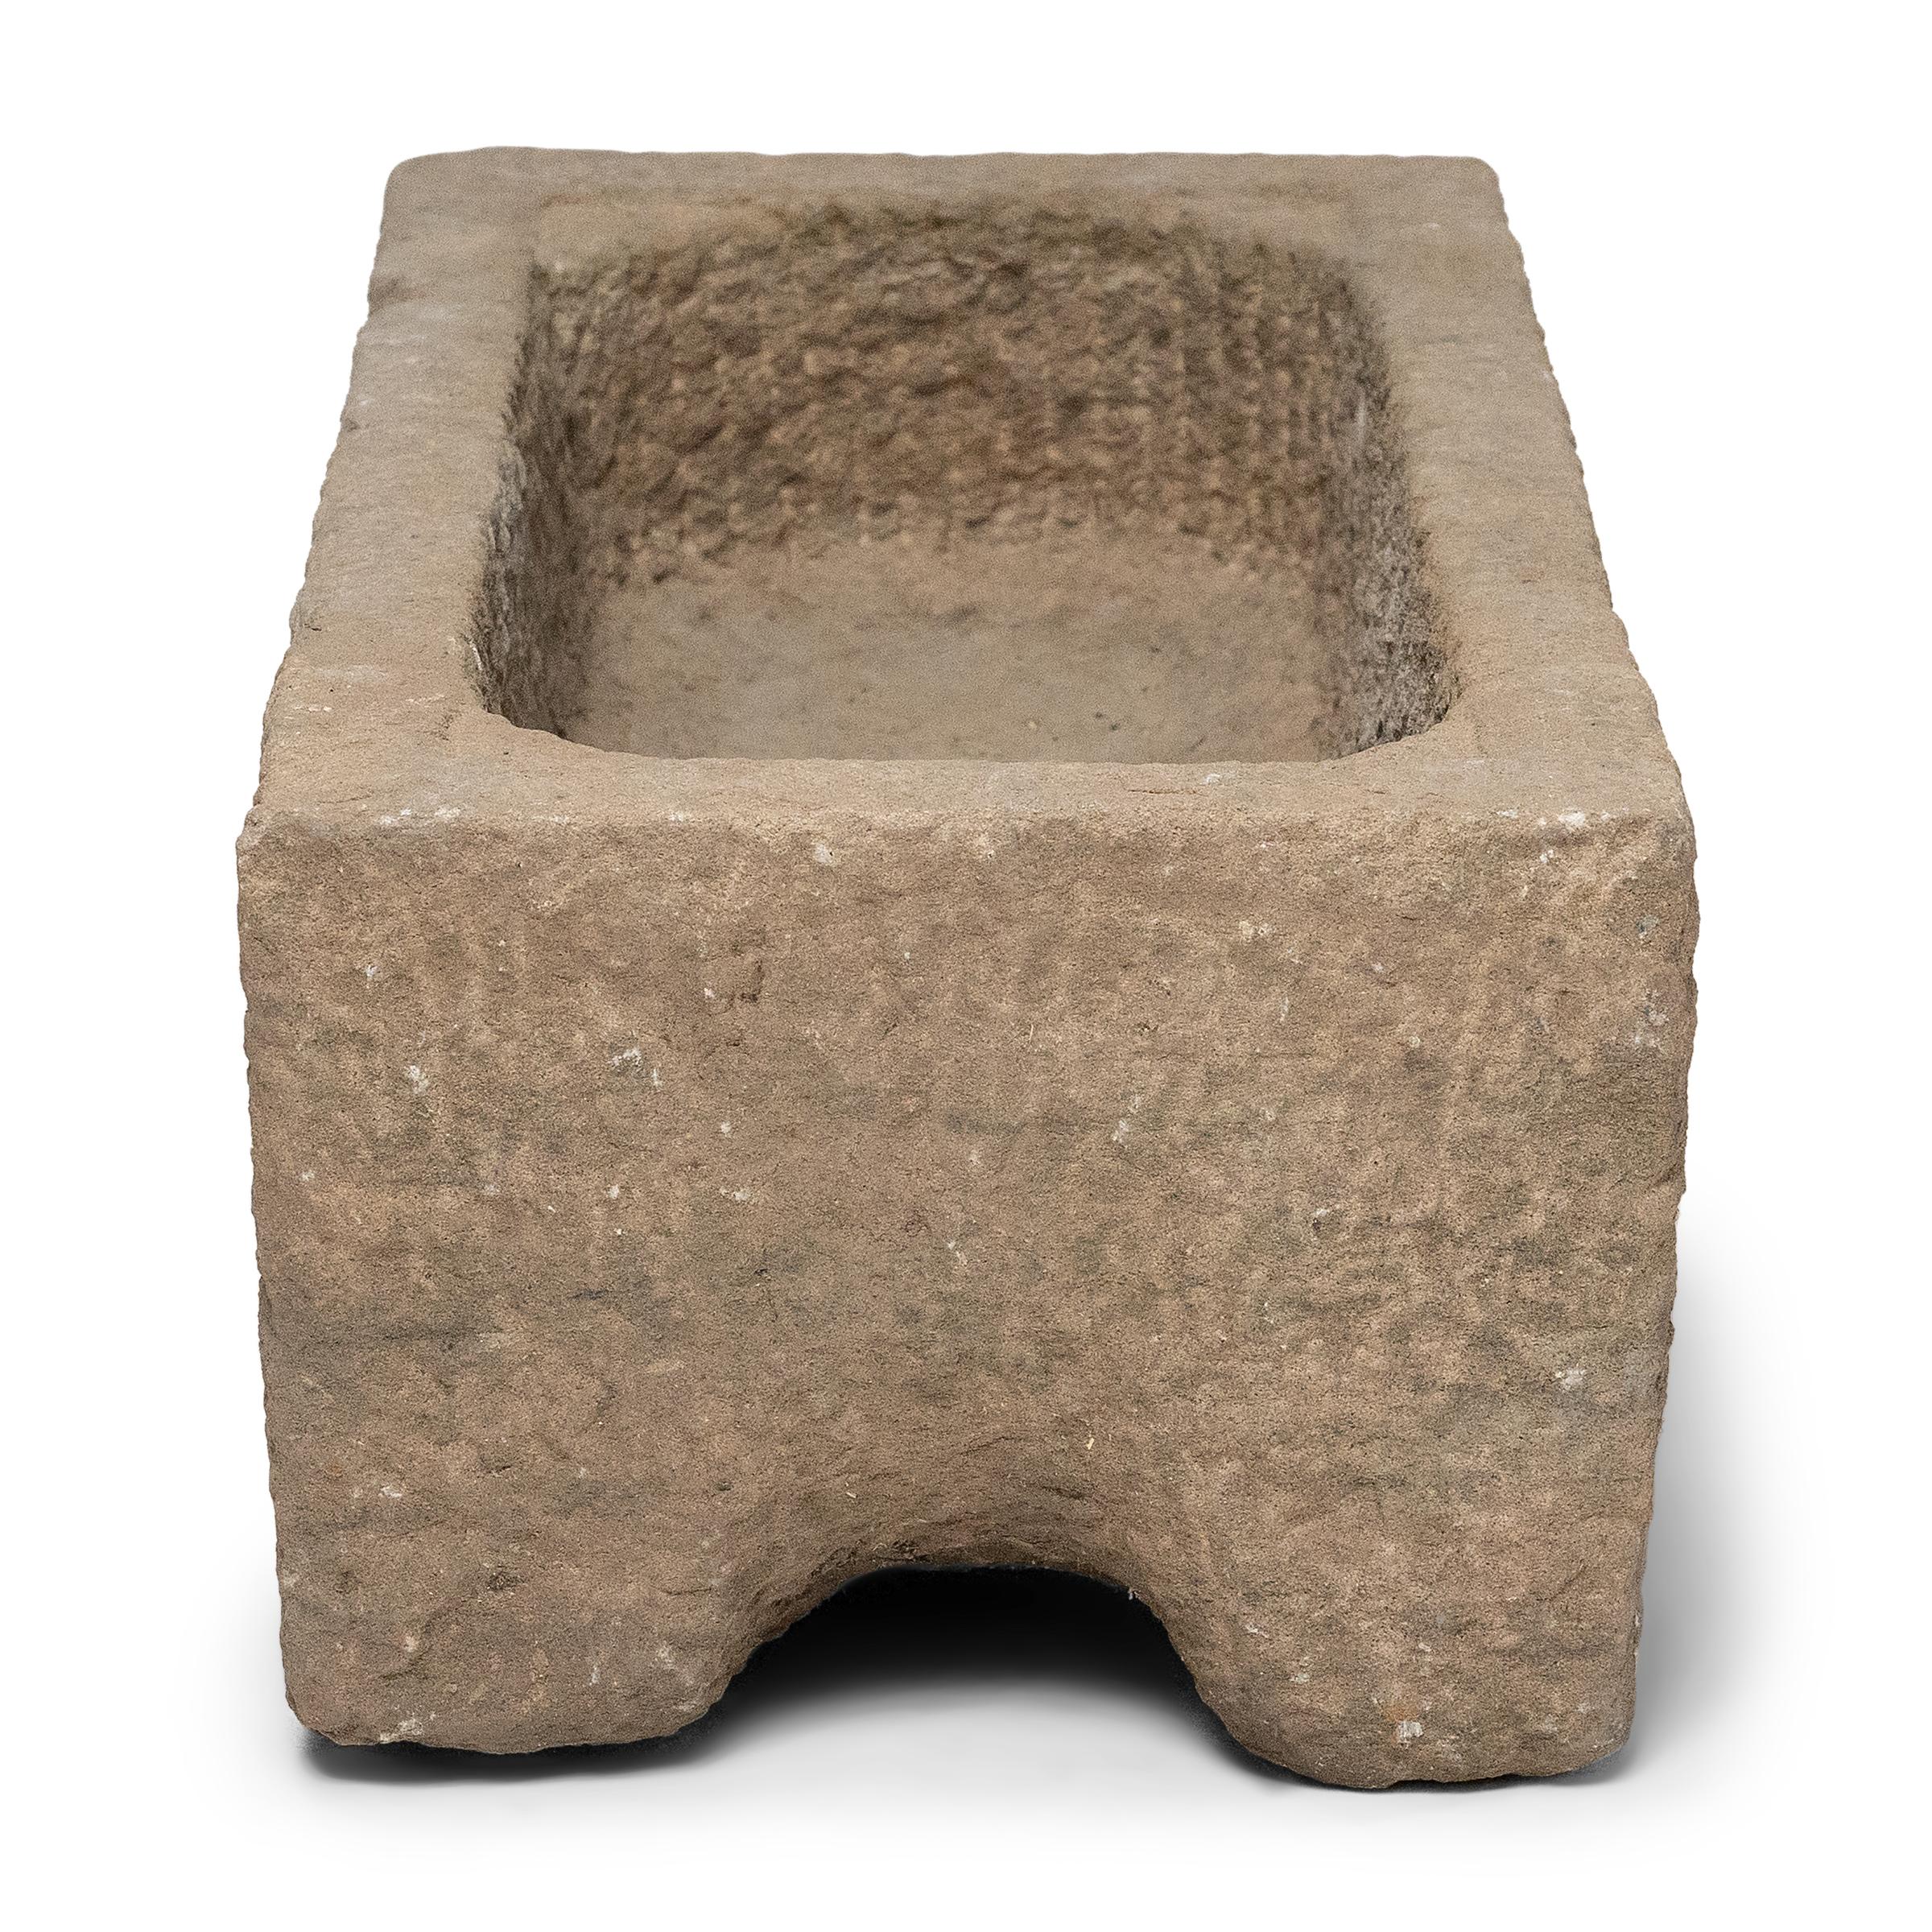 20th Century Footed Chinese Stone Water Trough, c. 1900 For Sale